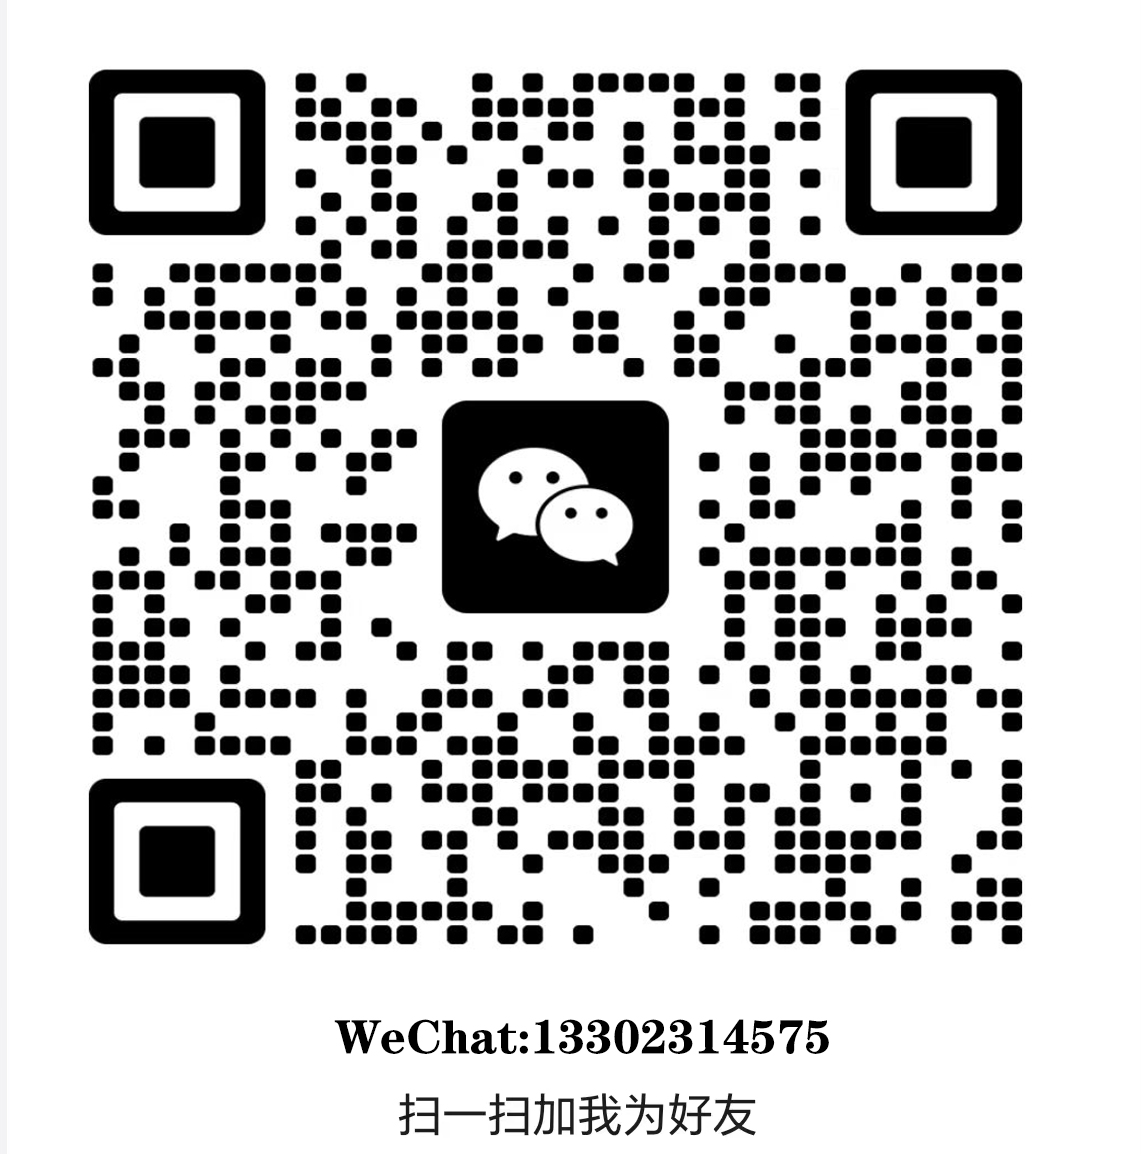 WeChat Scan for more latest news